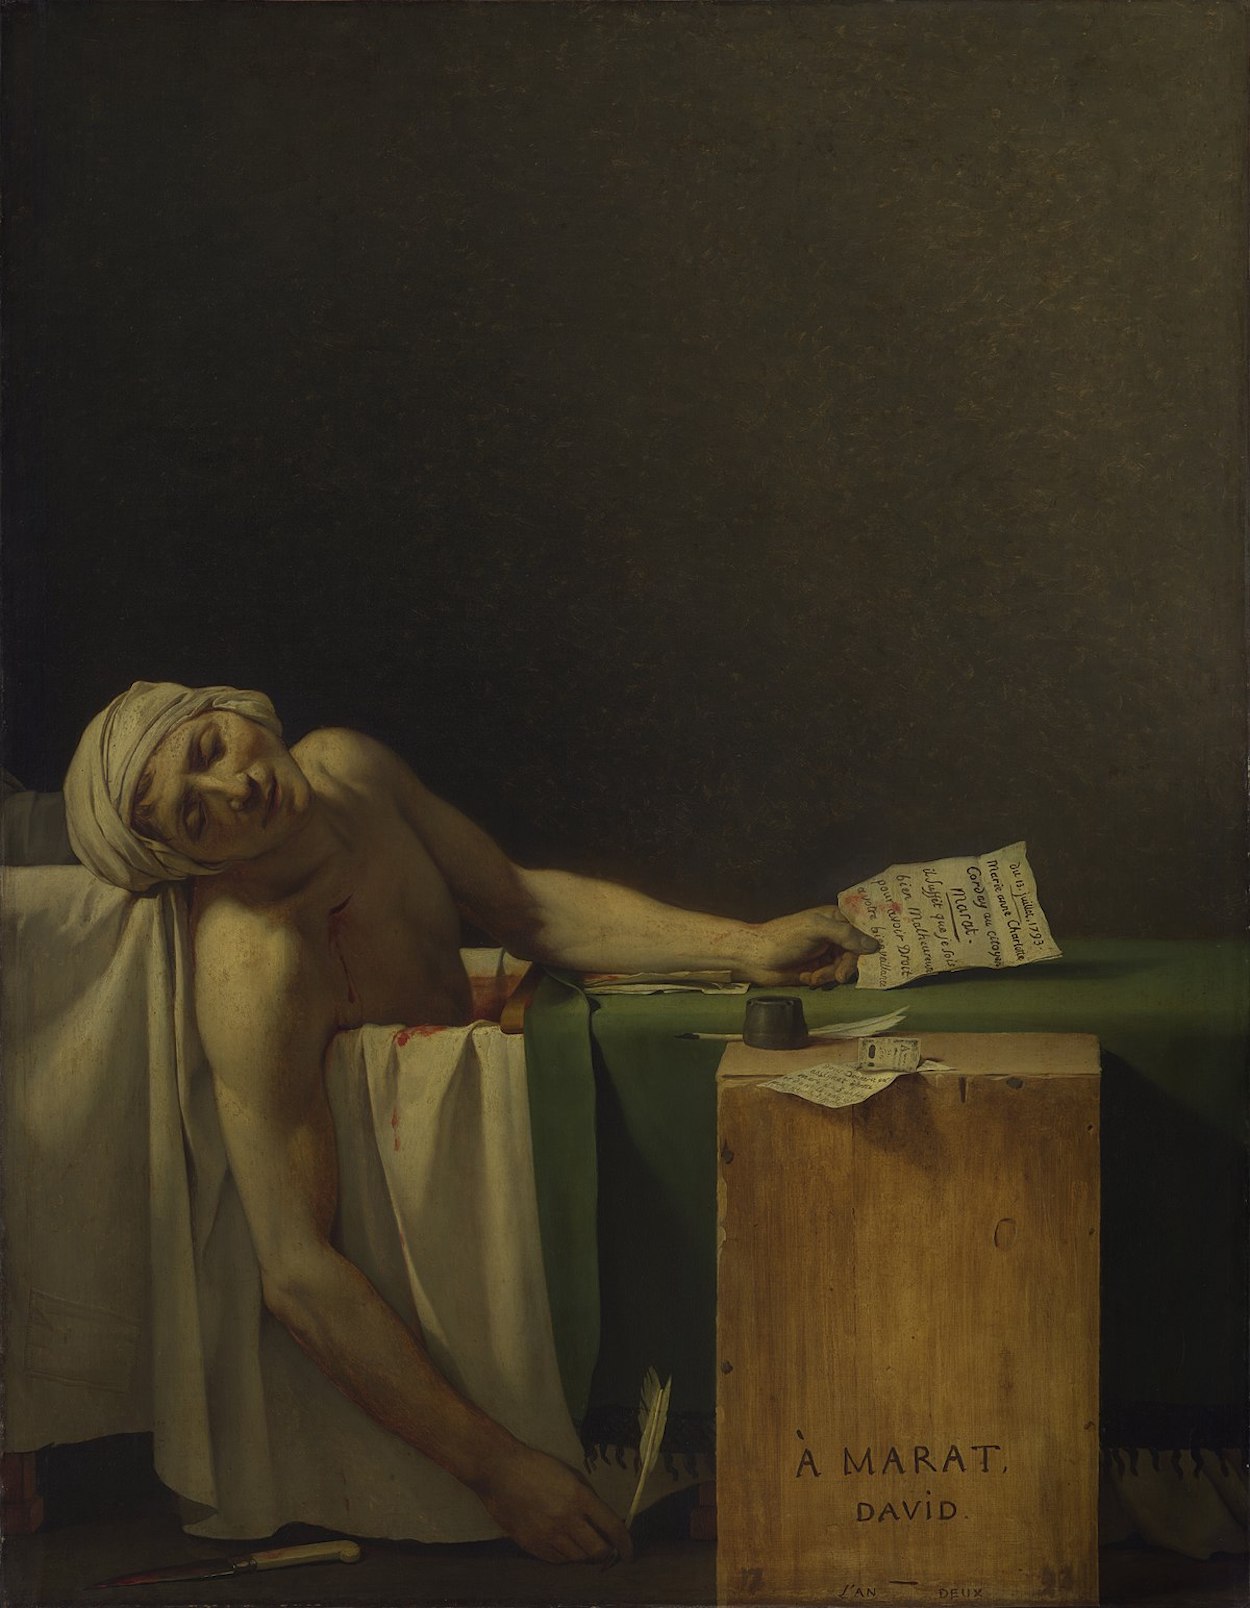 The Death of Marat by Jacques-Louis David - 1793 - 162 × 128 cm The Royal Museums of Fine Arts of Belgium